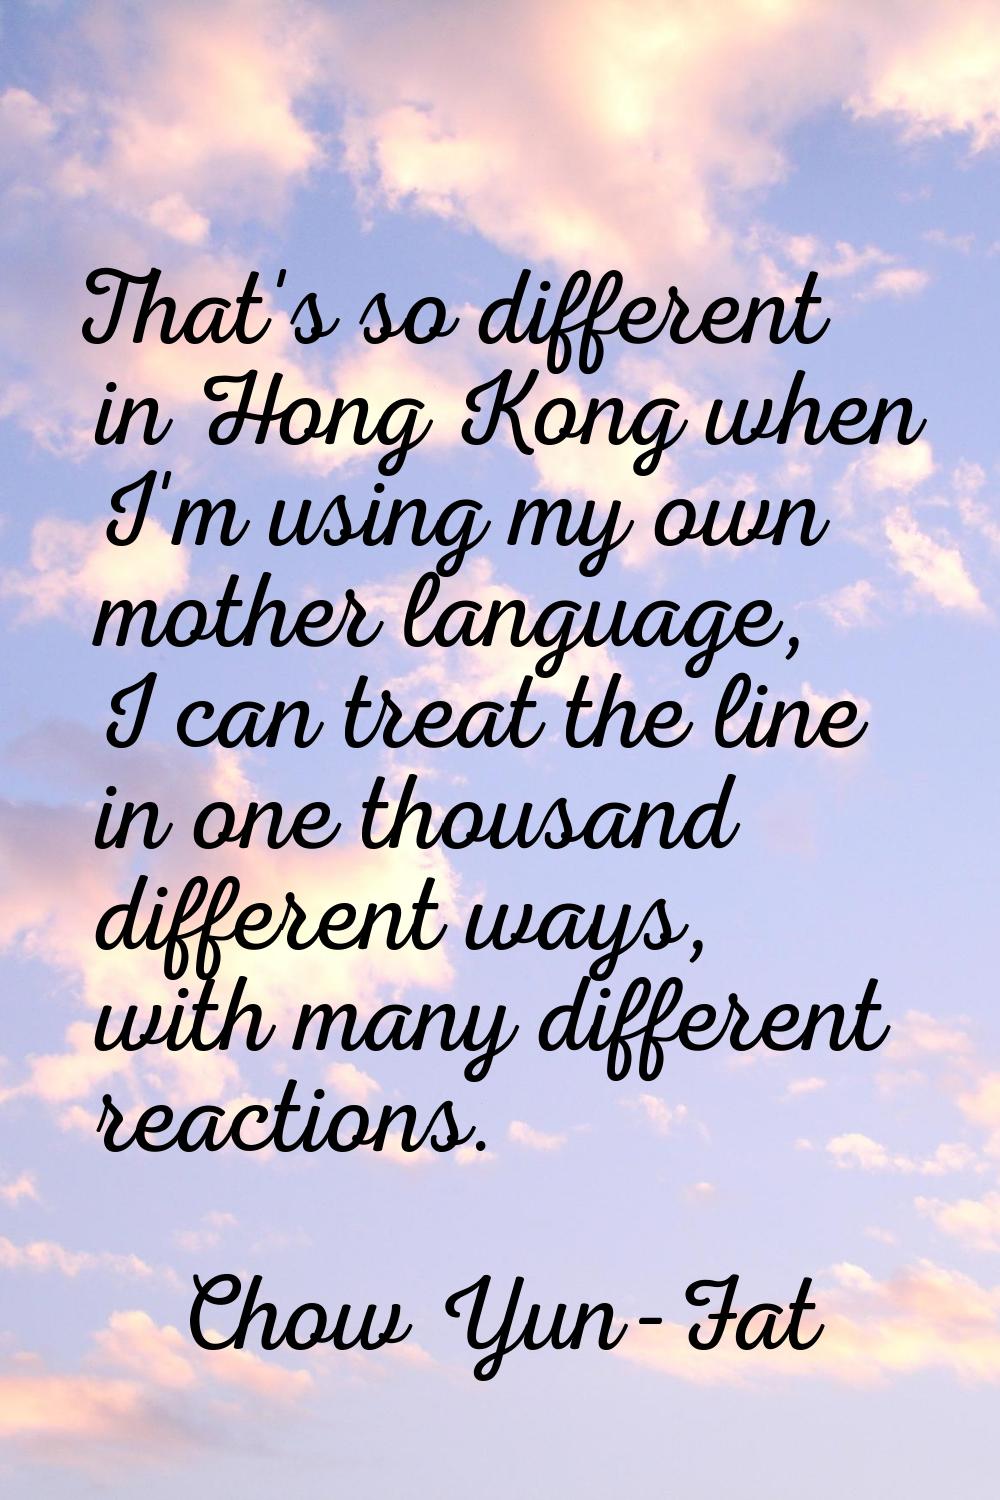 That's so different in Hong Kong when I'm using my own mother language, I can treat the line in one